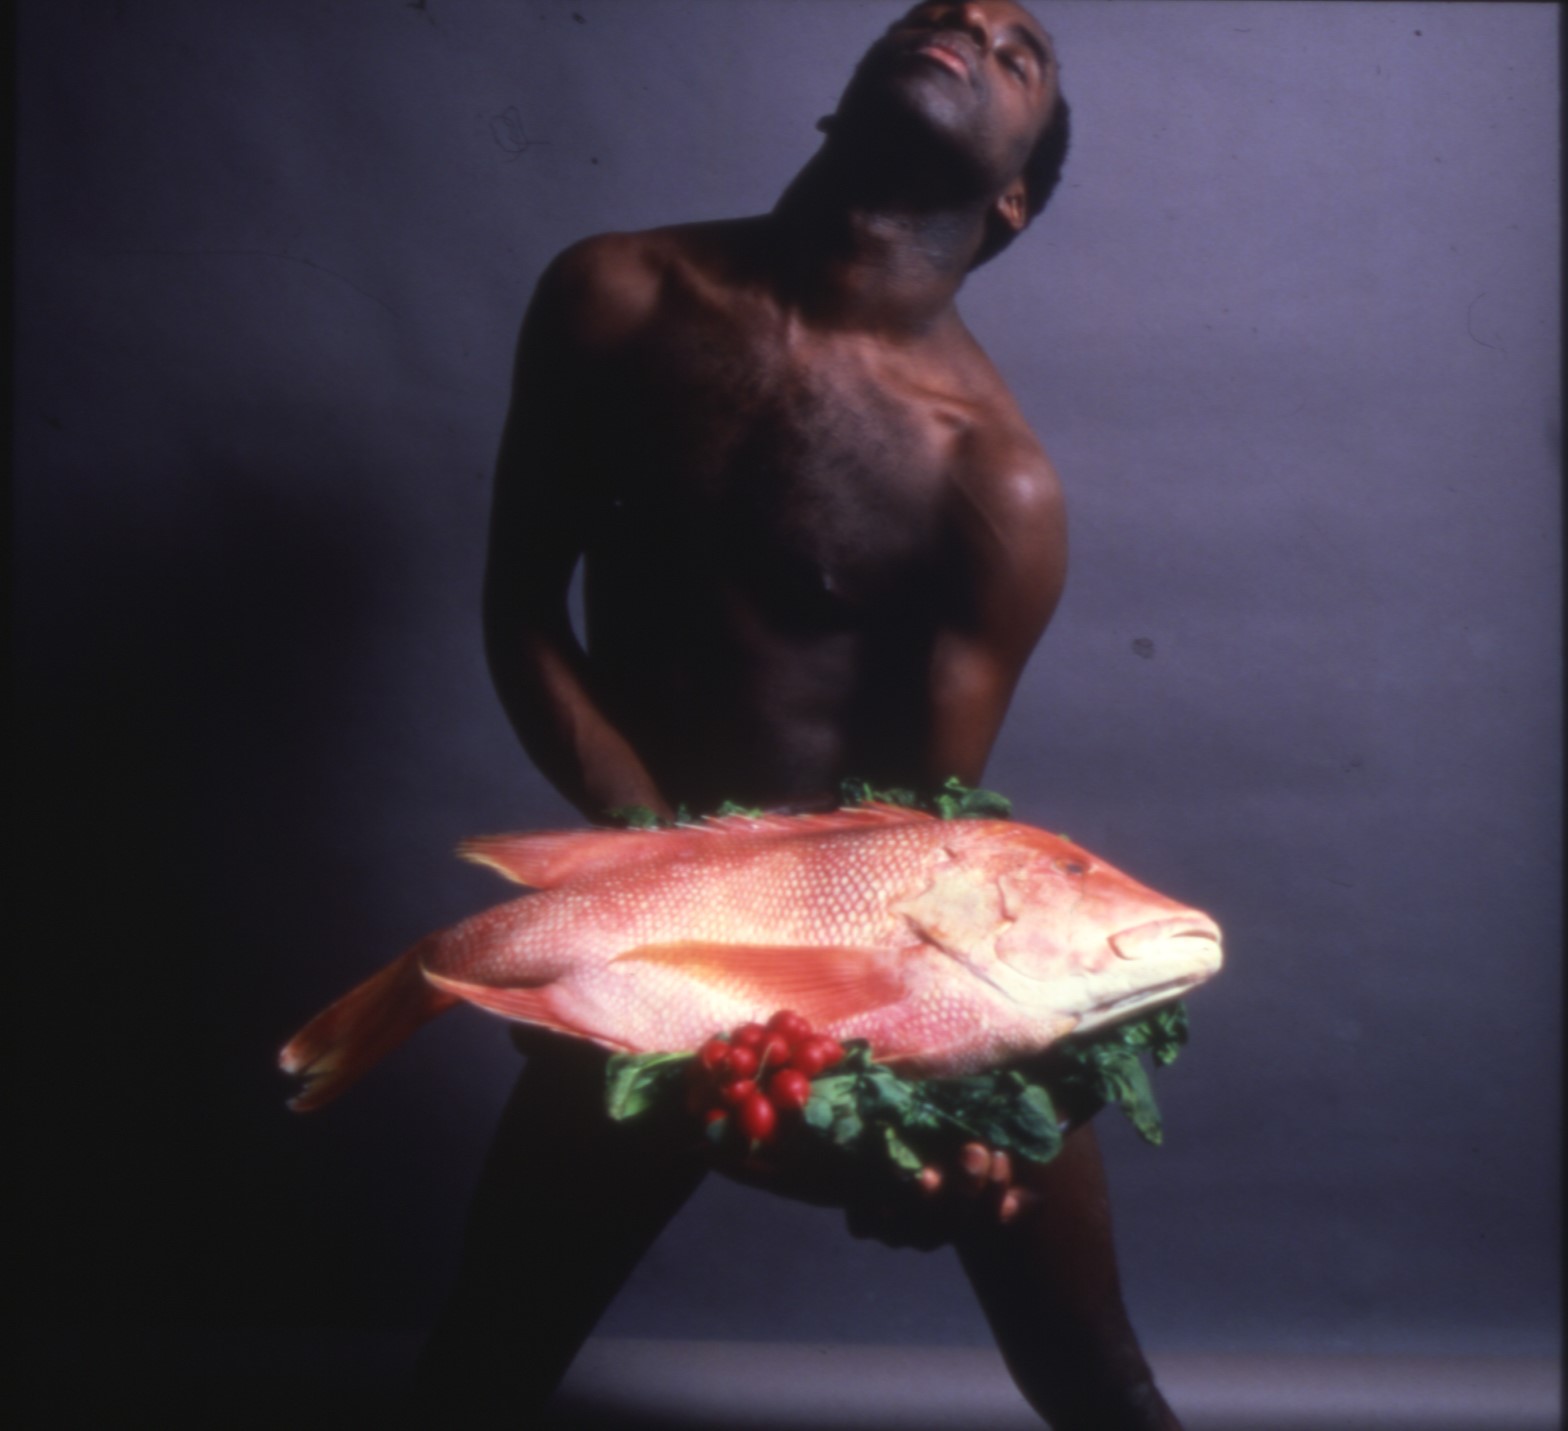 Colour photograph of a young black man, nude, with his eyes closed, holding a large fish, possibly a red snapper